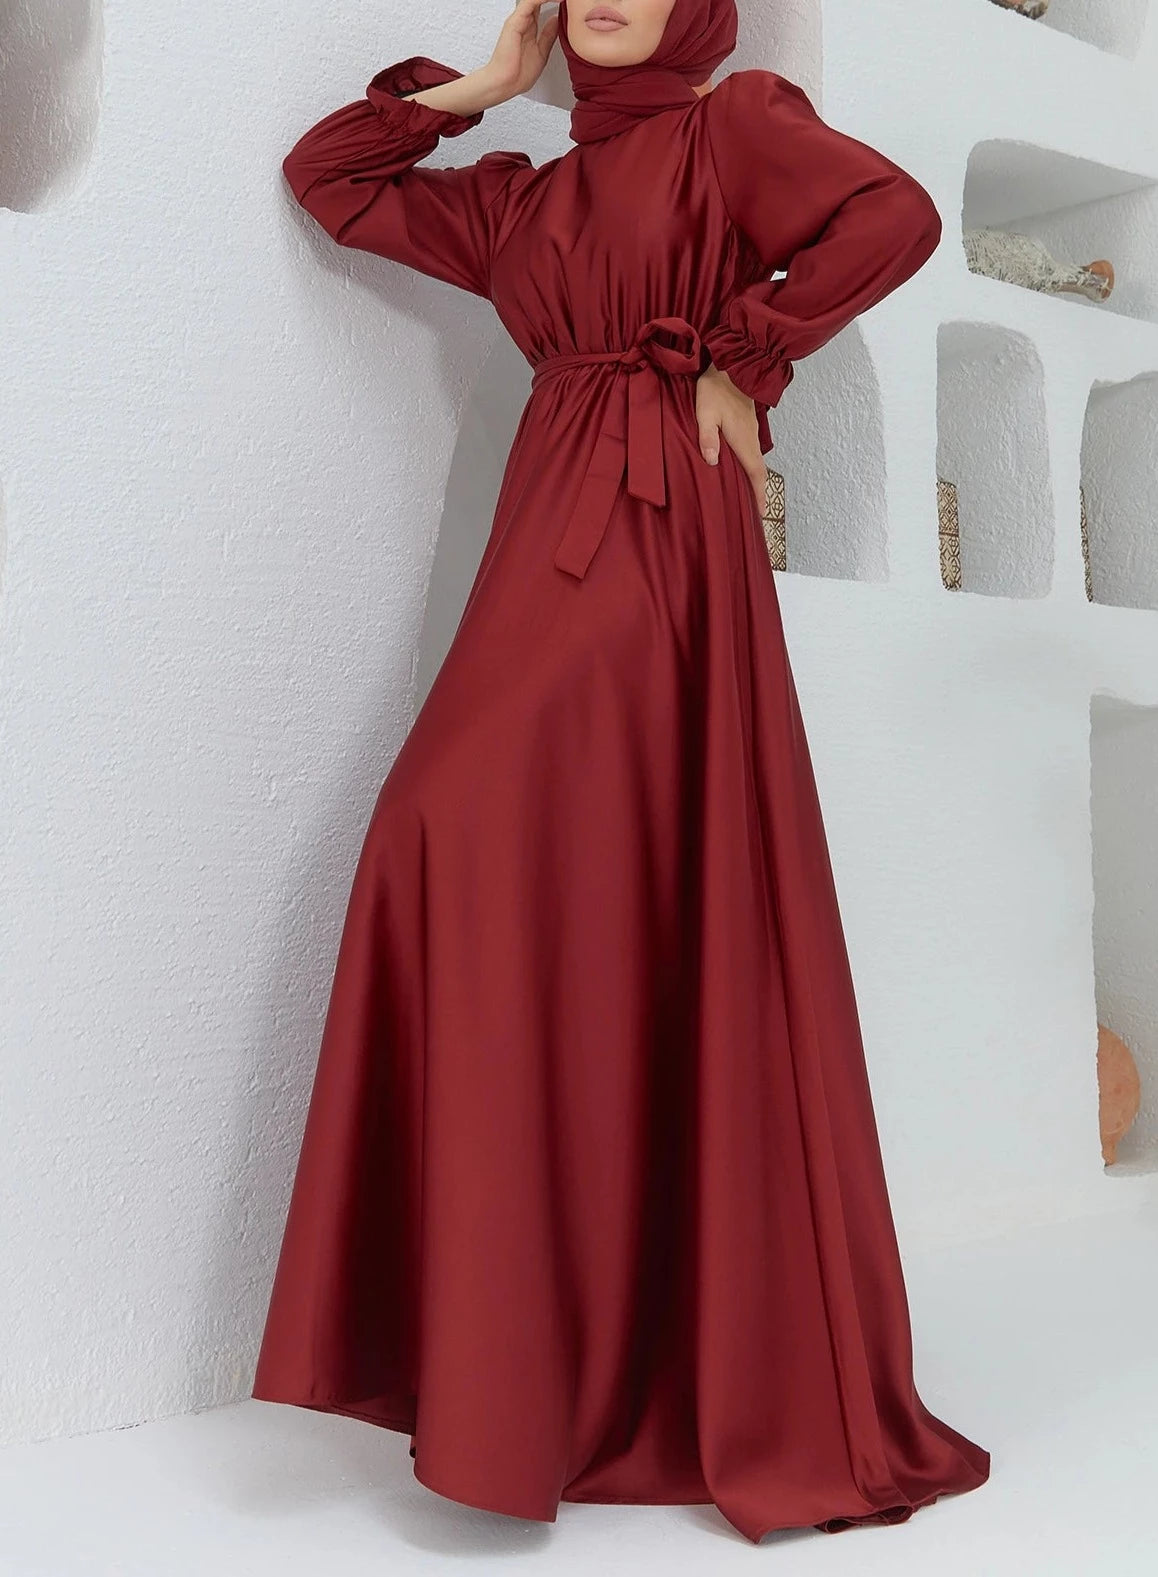 Belted satin evening dress - Try Modest Limited 